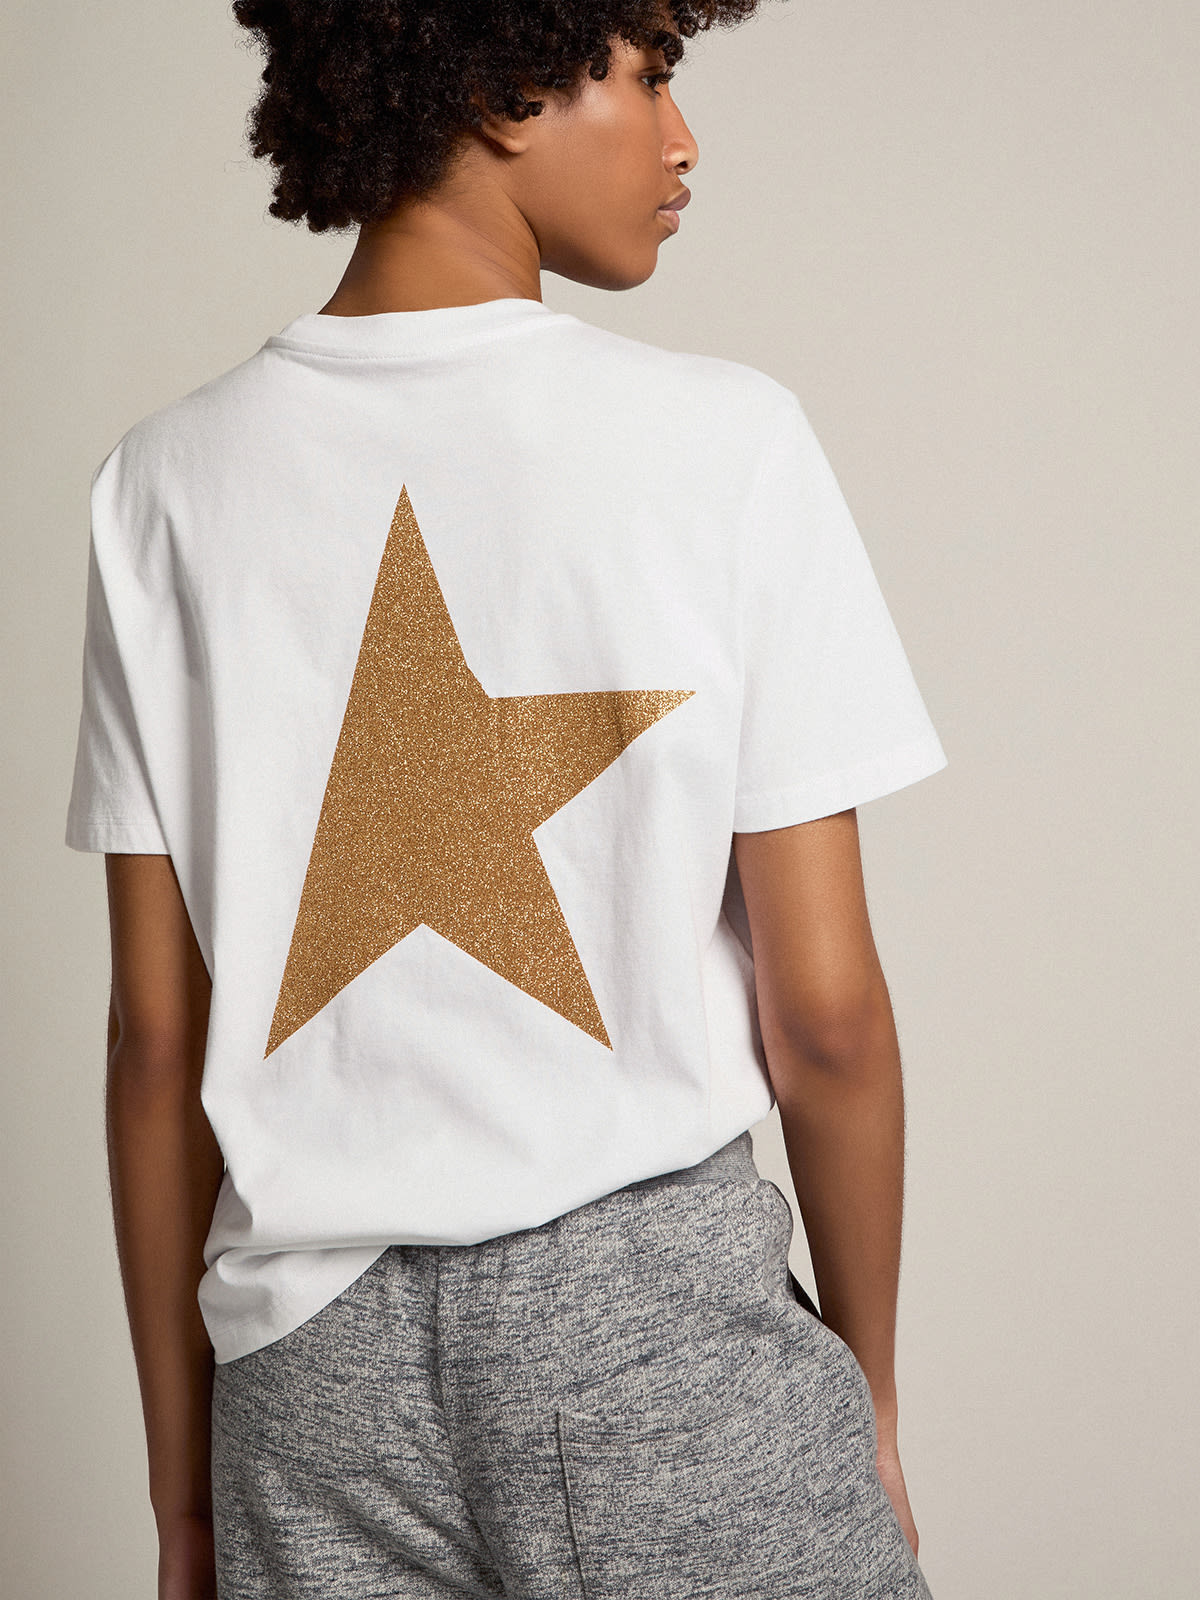 Golden Goose - Women's white T-shirt with gold glitter logo and star in 